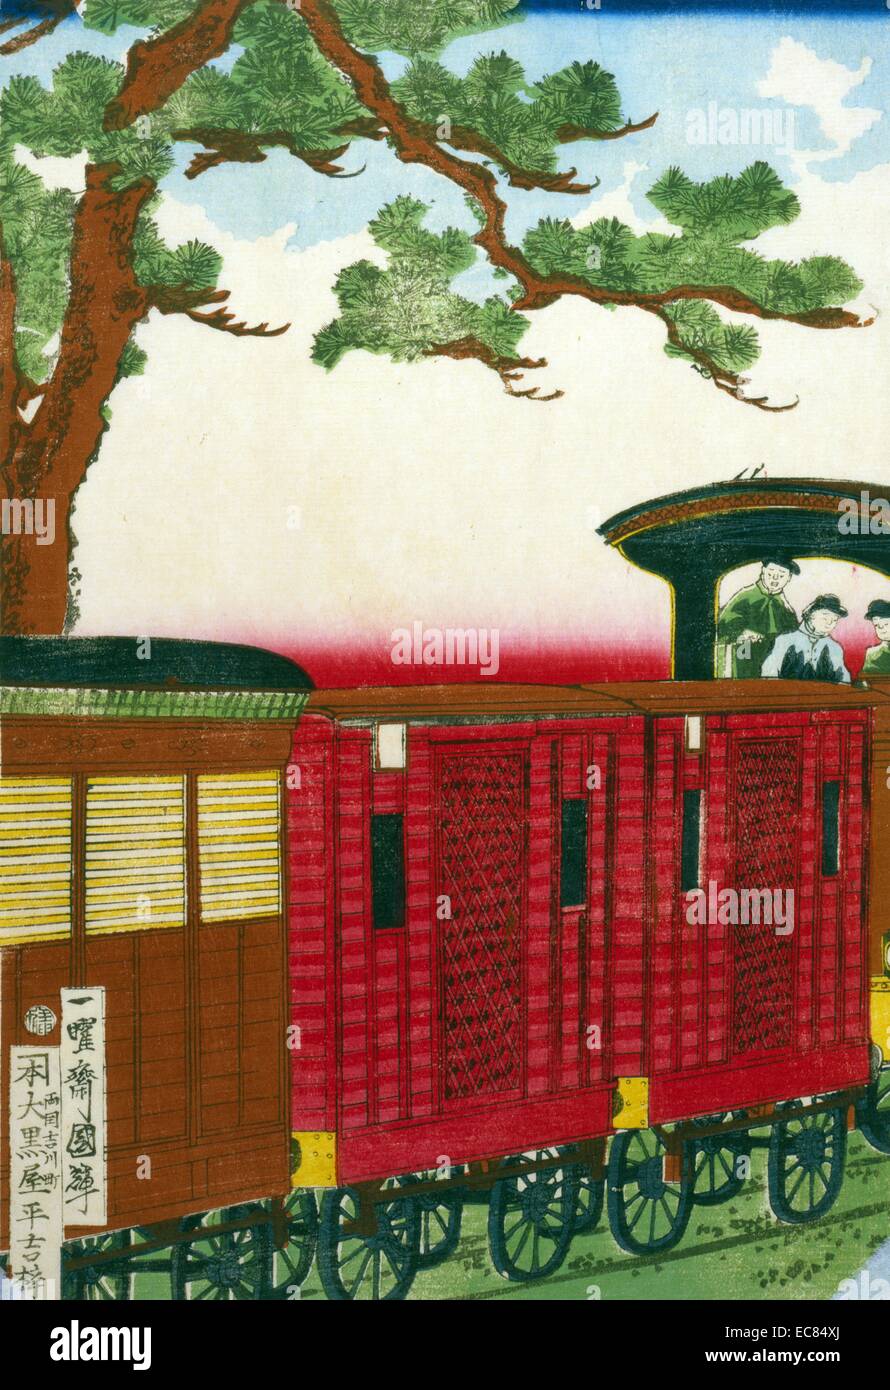 Japanese hand coloured woodcut. The image shows a steam train pulling its carriages, while passing under a large pine tree. The conductor and his crew can be seen to the right of the image. Dated 1872. Stock Photo